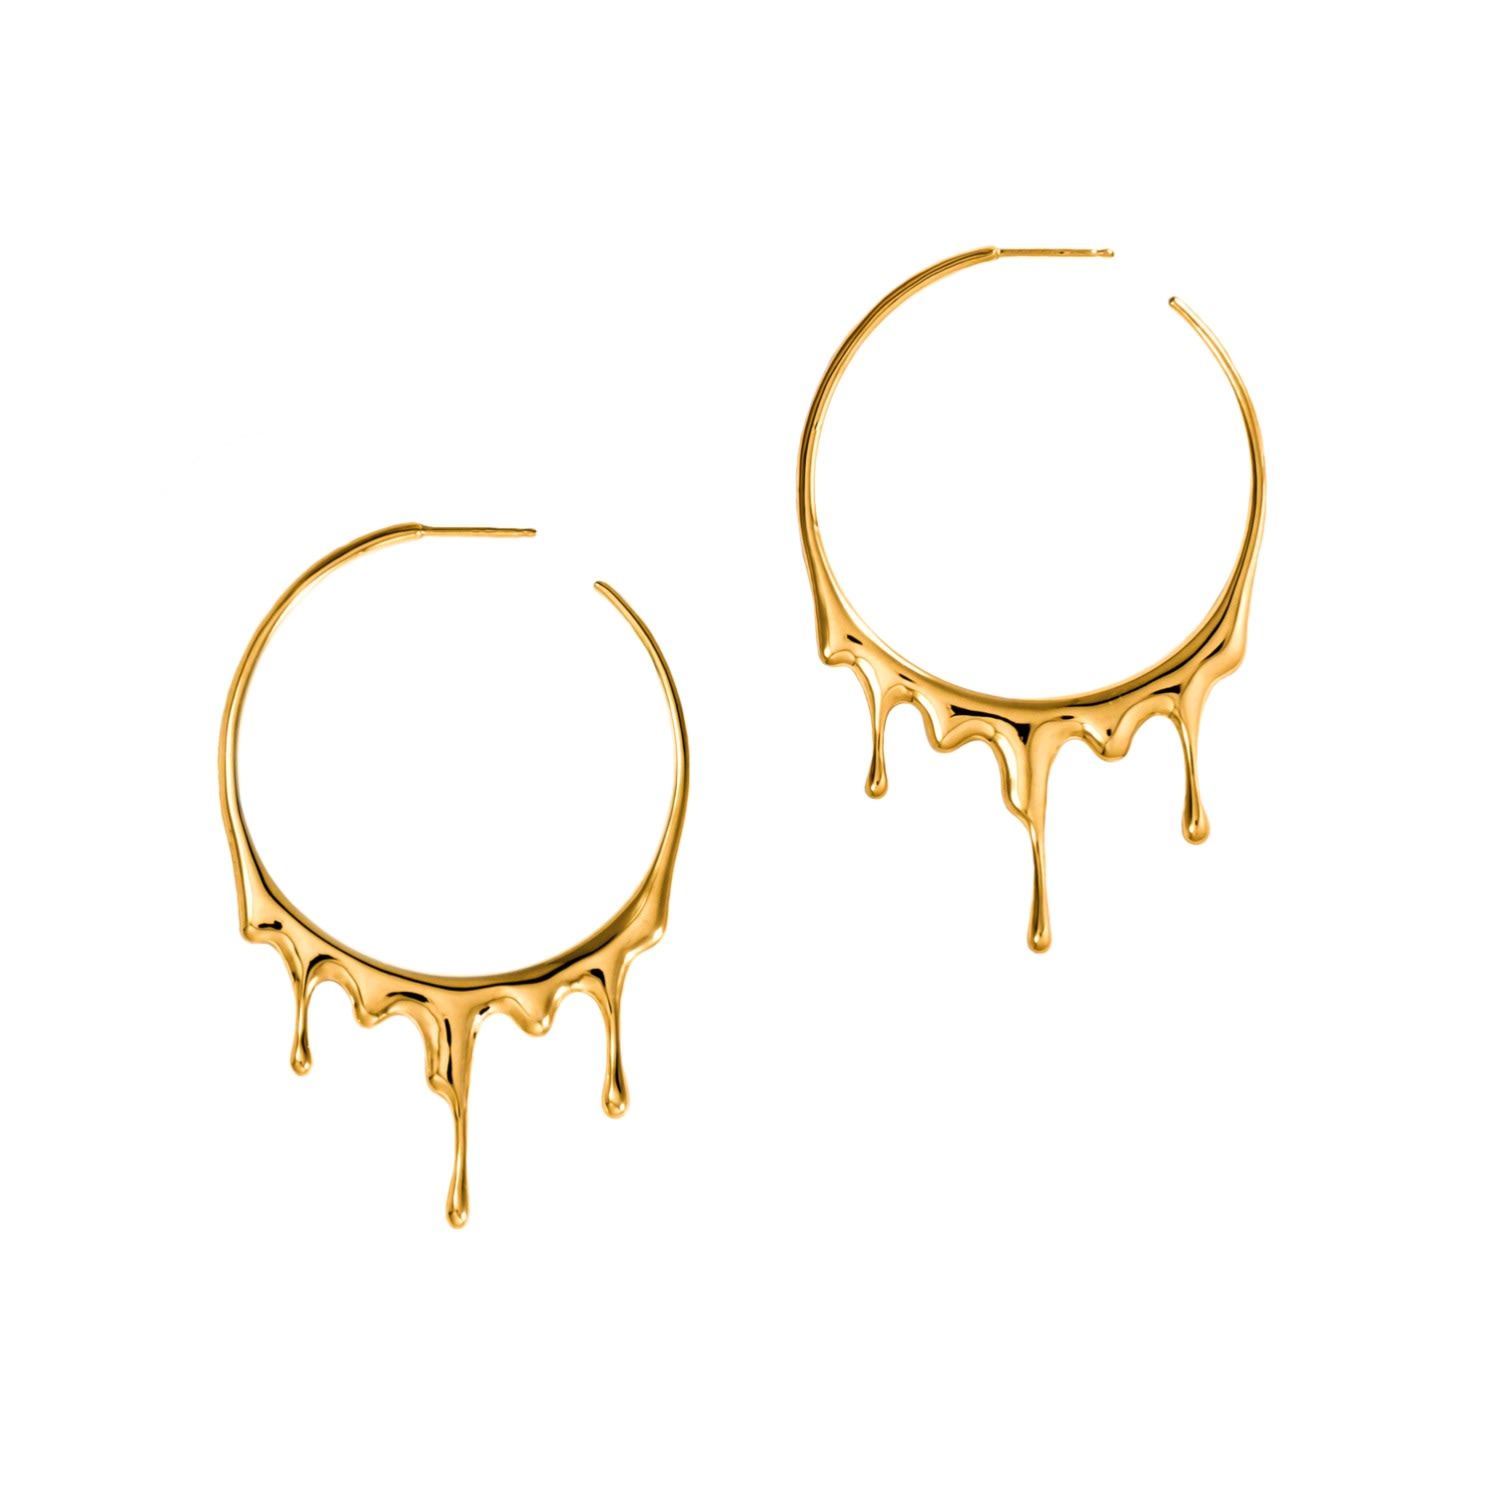 Dripping Circular L Gold Earrings | Wolf & Badger (US)